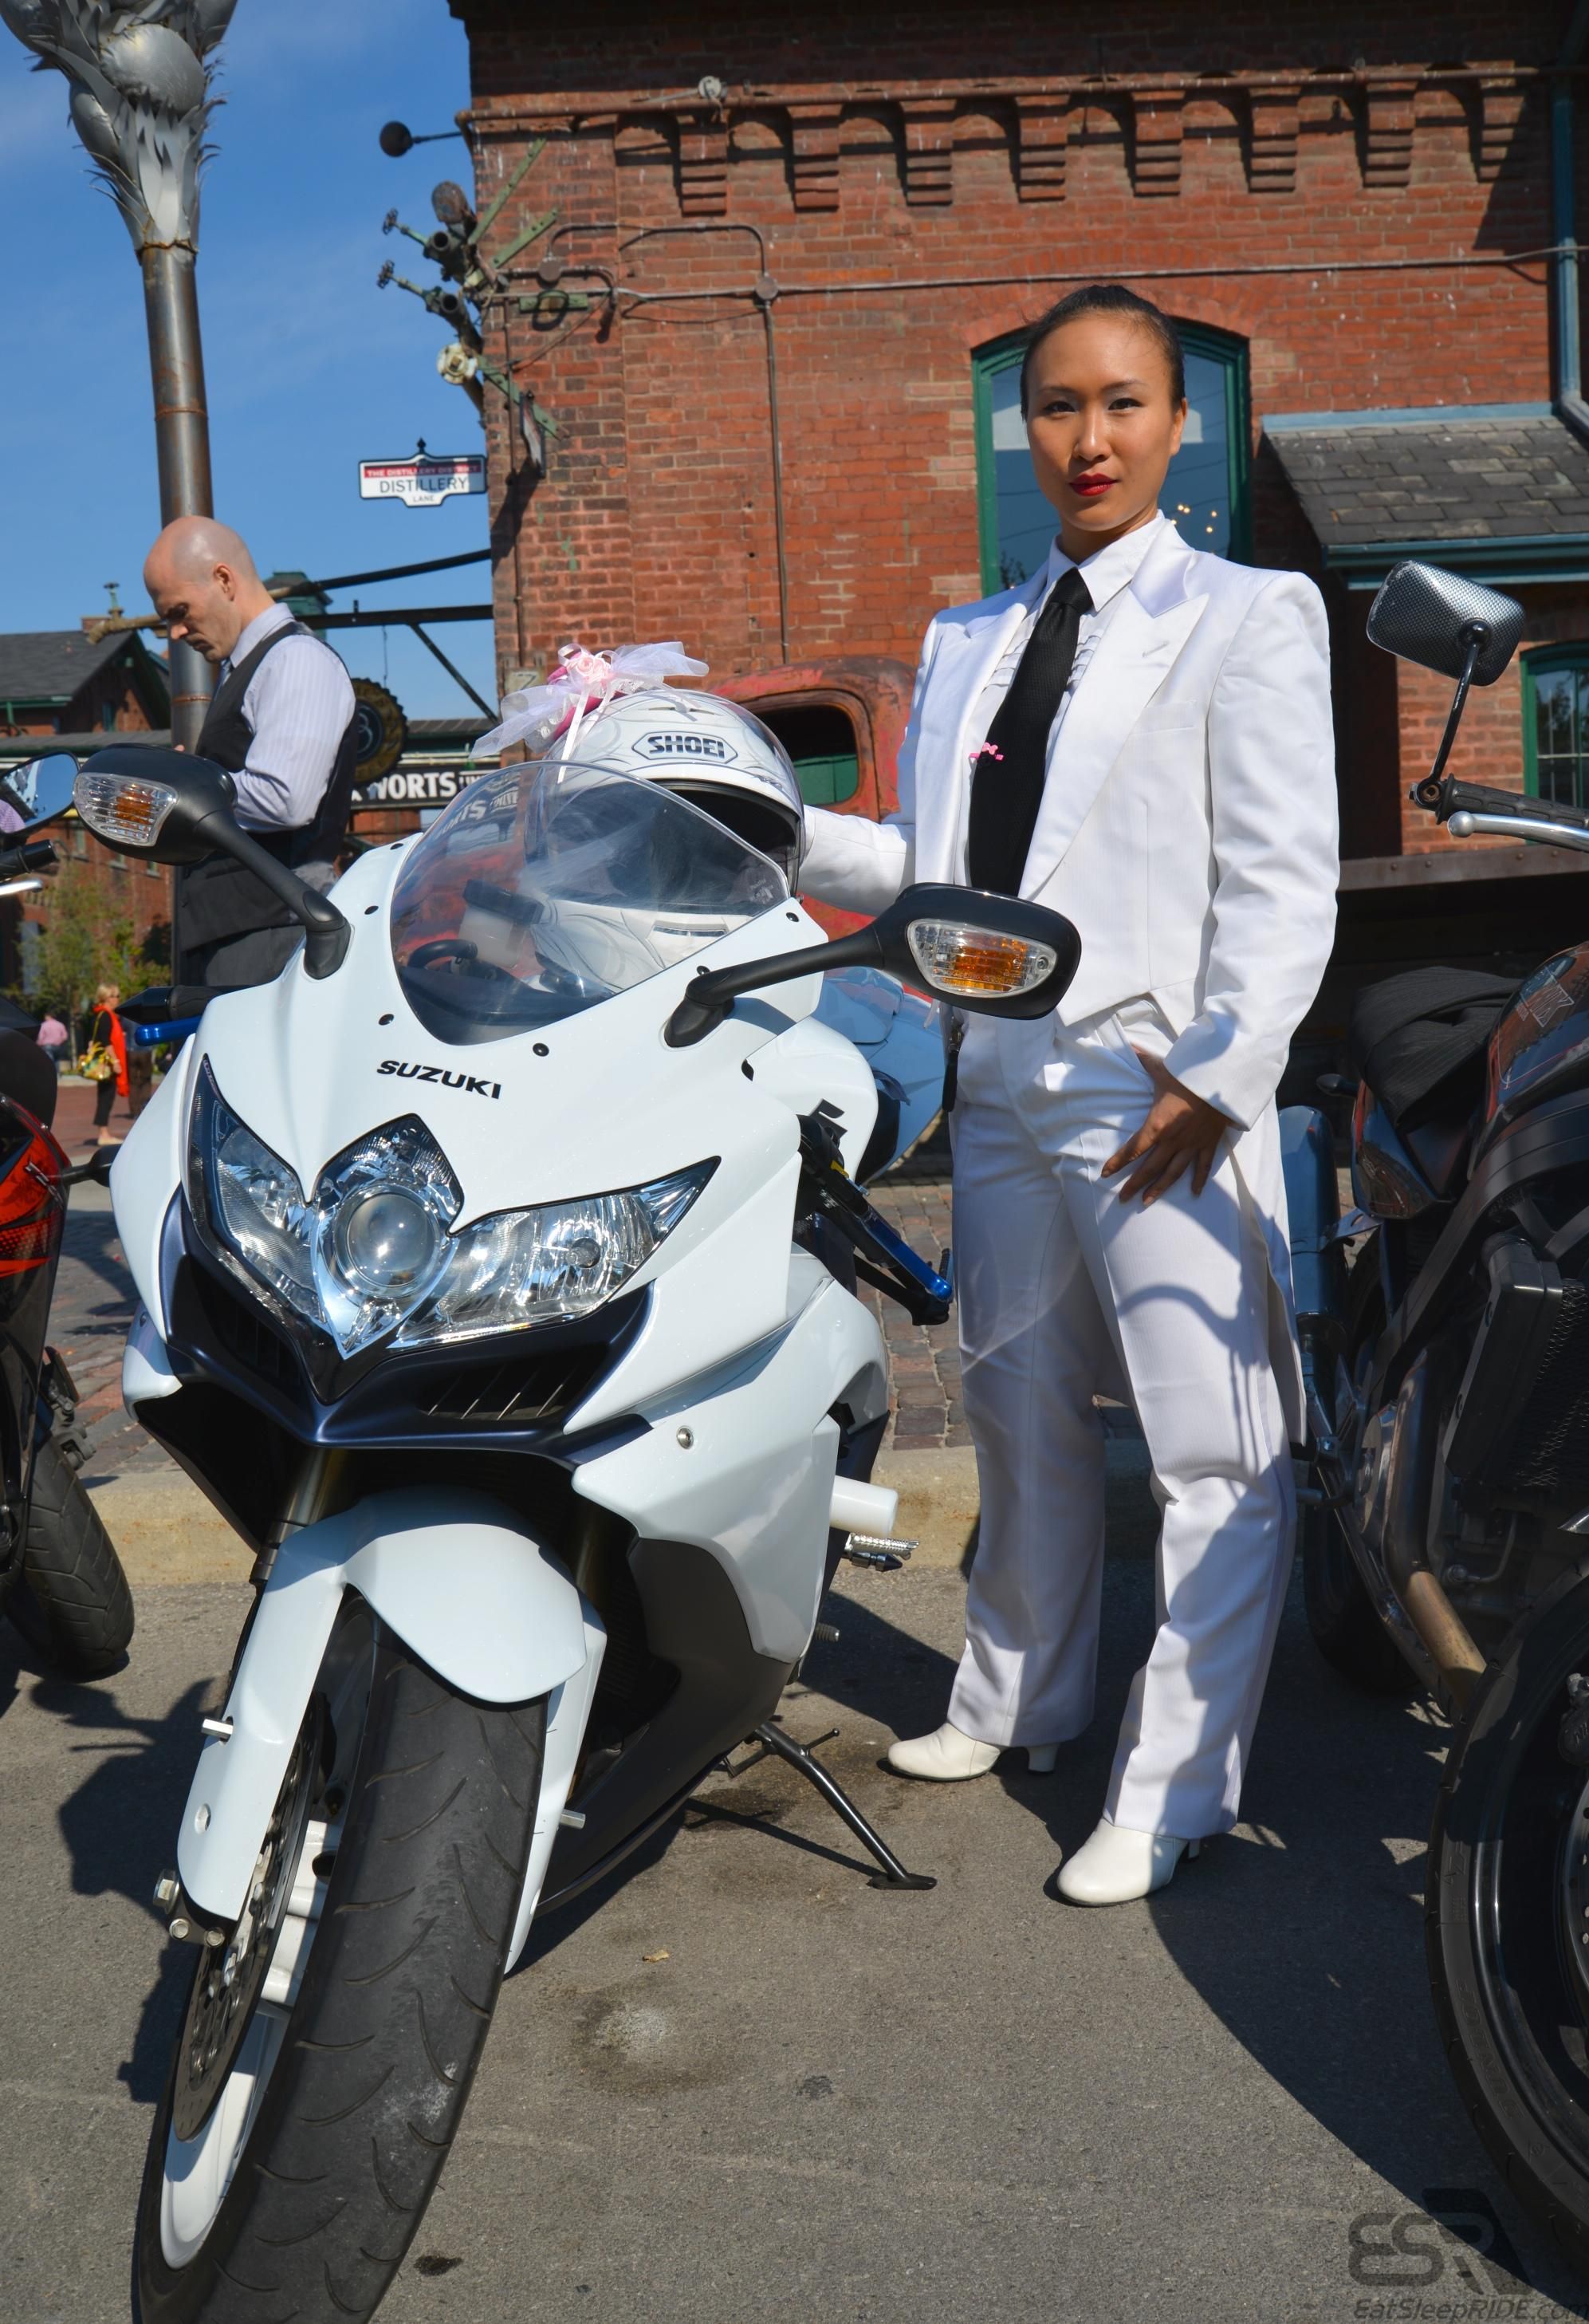 Angel and her GSXR 600 - DGR Toronto